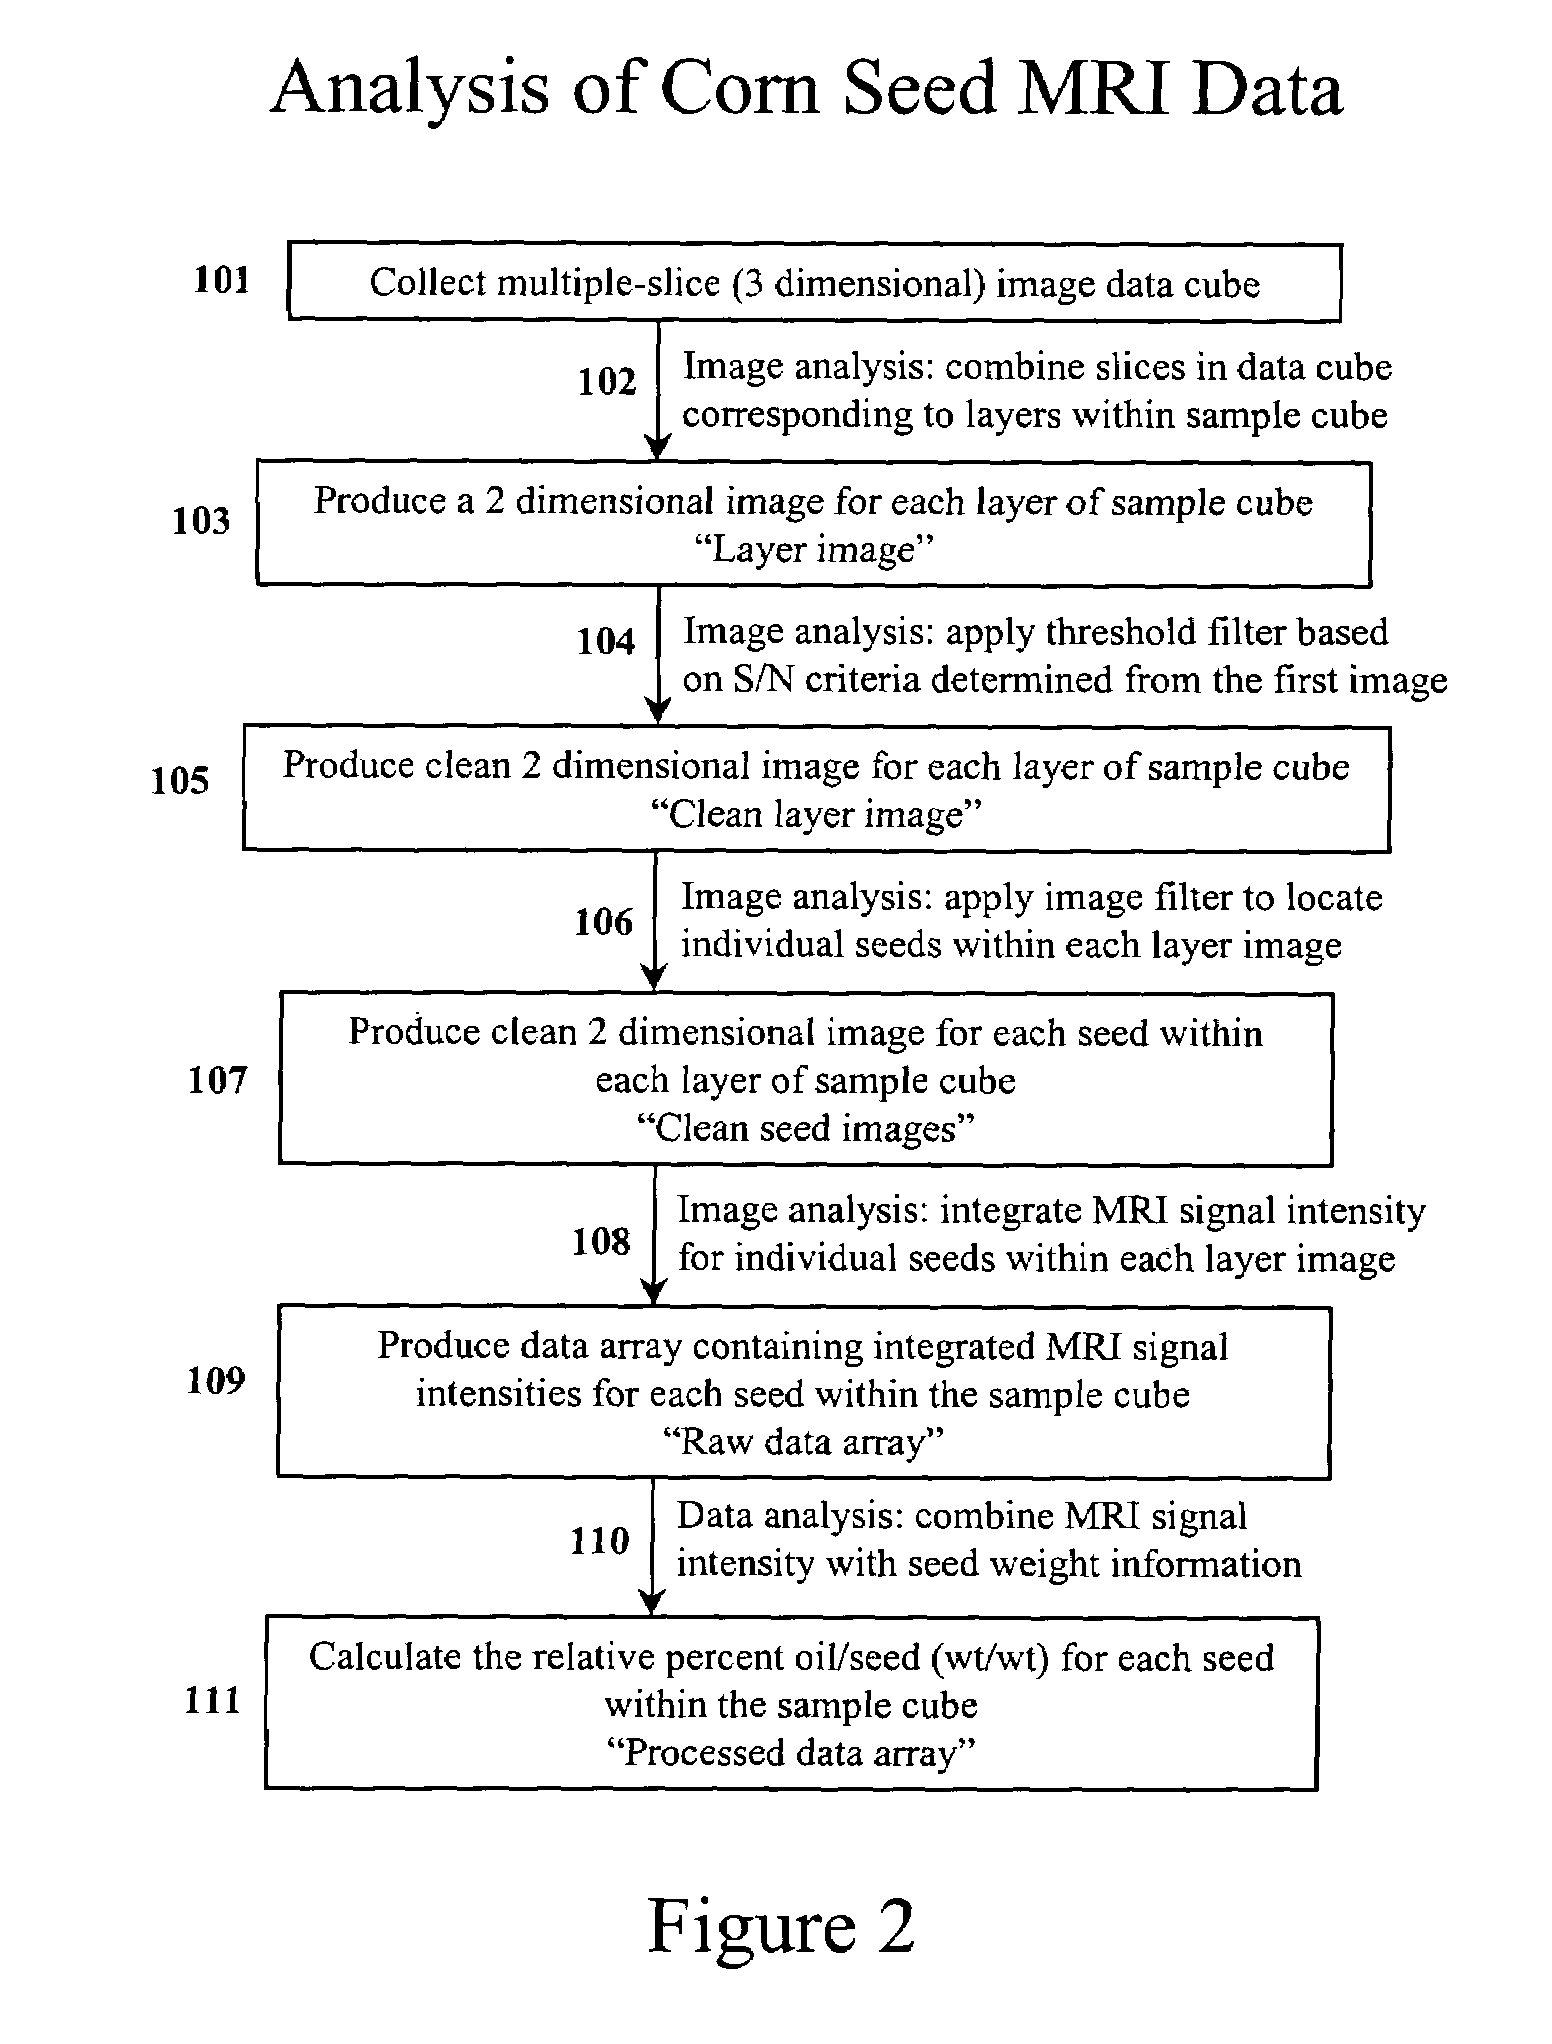 Apparatus and methods for analyzing and improving agricultural products